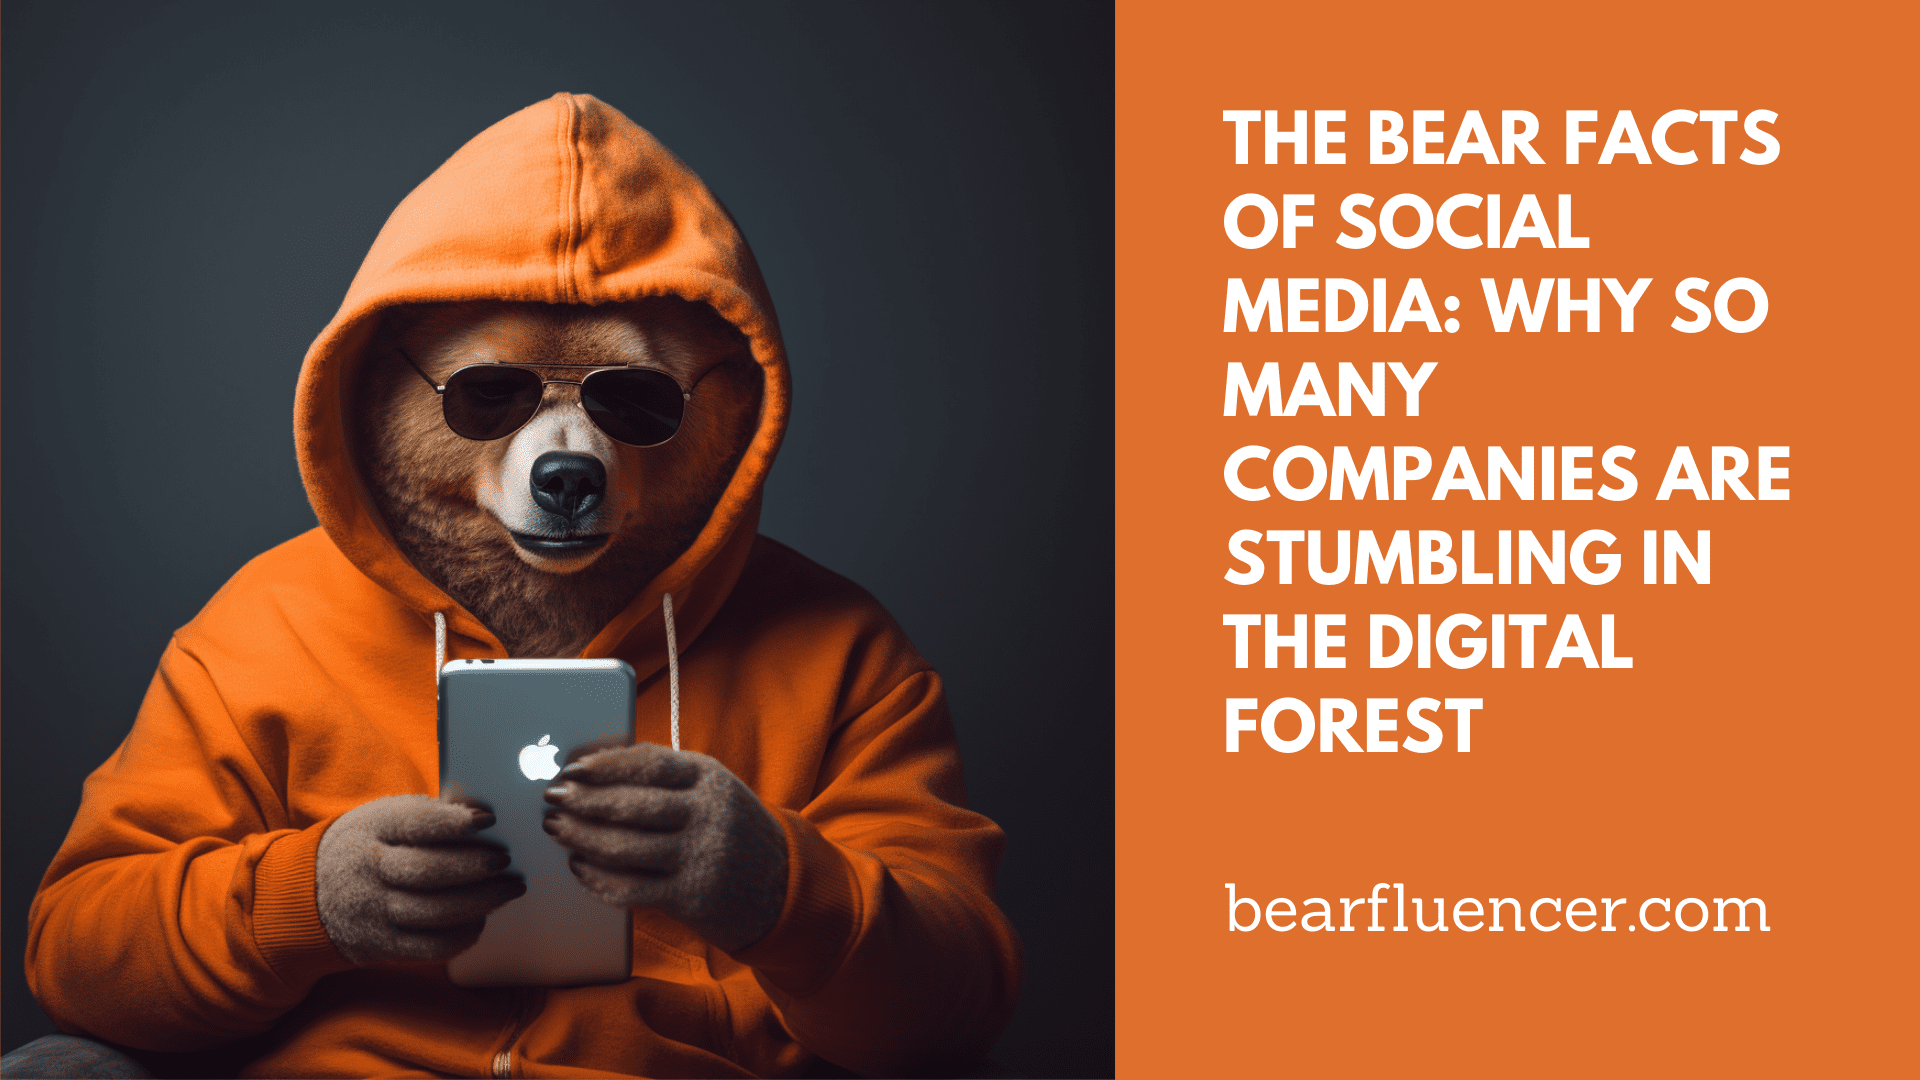 The Bear Facts of Social Media: Why So Many Companies are Stumbling in the Digital Forest